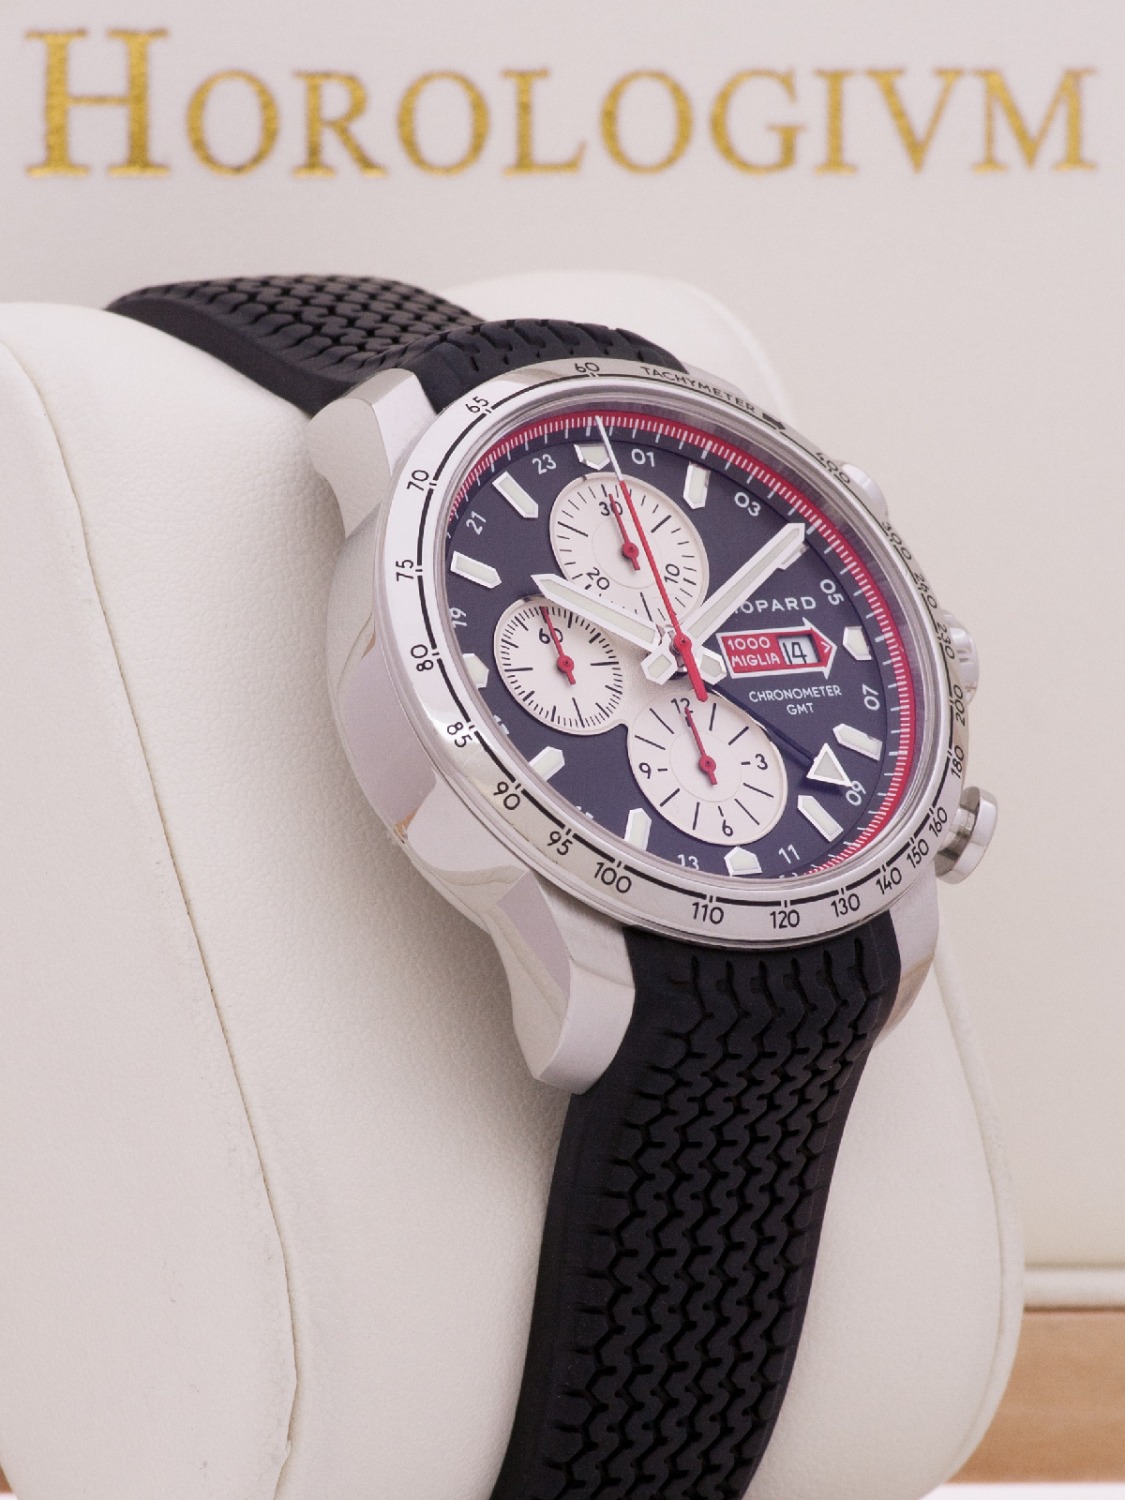 Chopard Mille Miglia Chronometer GMT Limited 2013 pcs. watch, silver